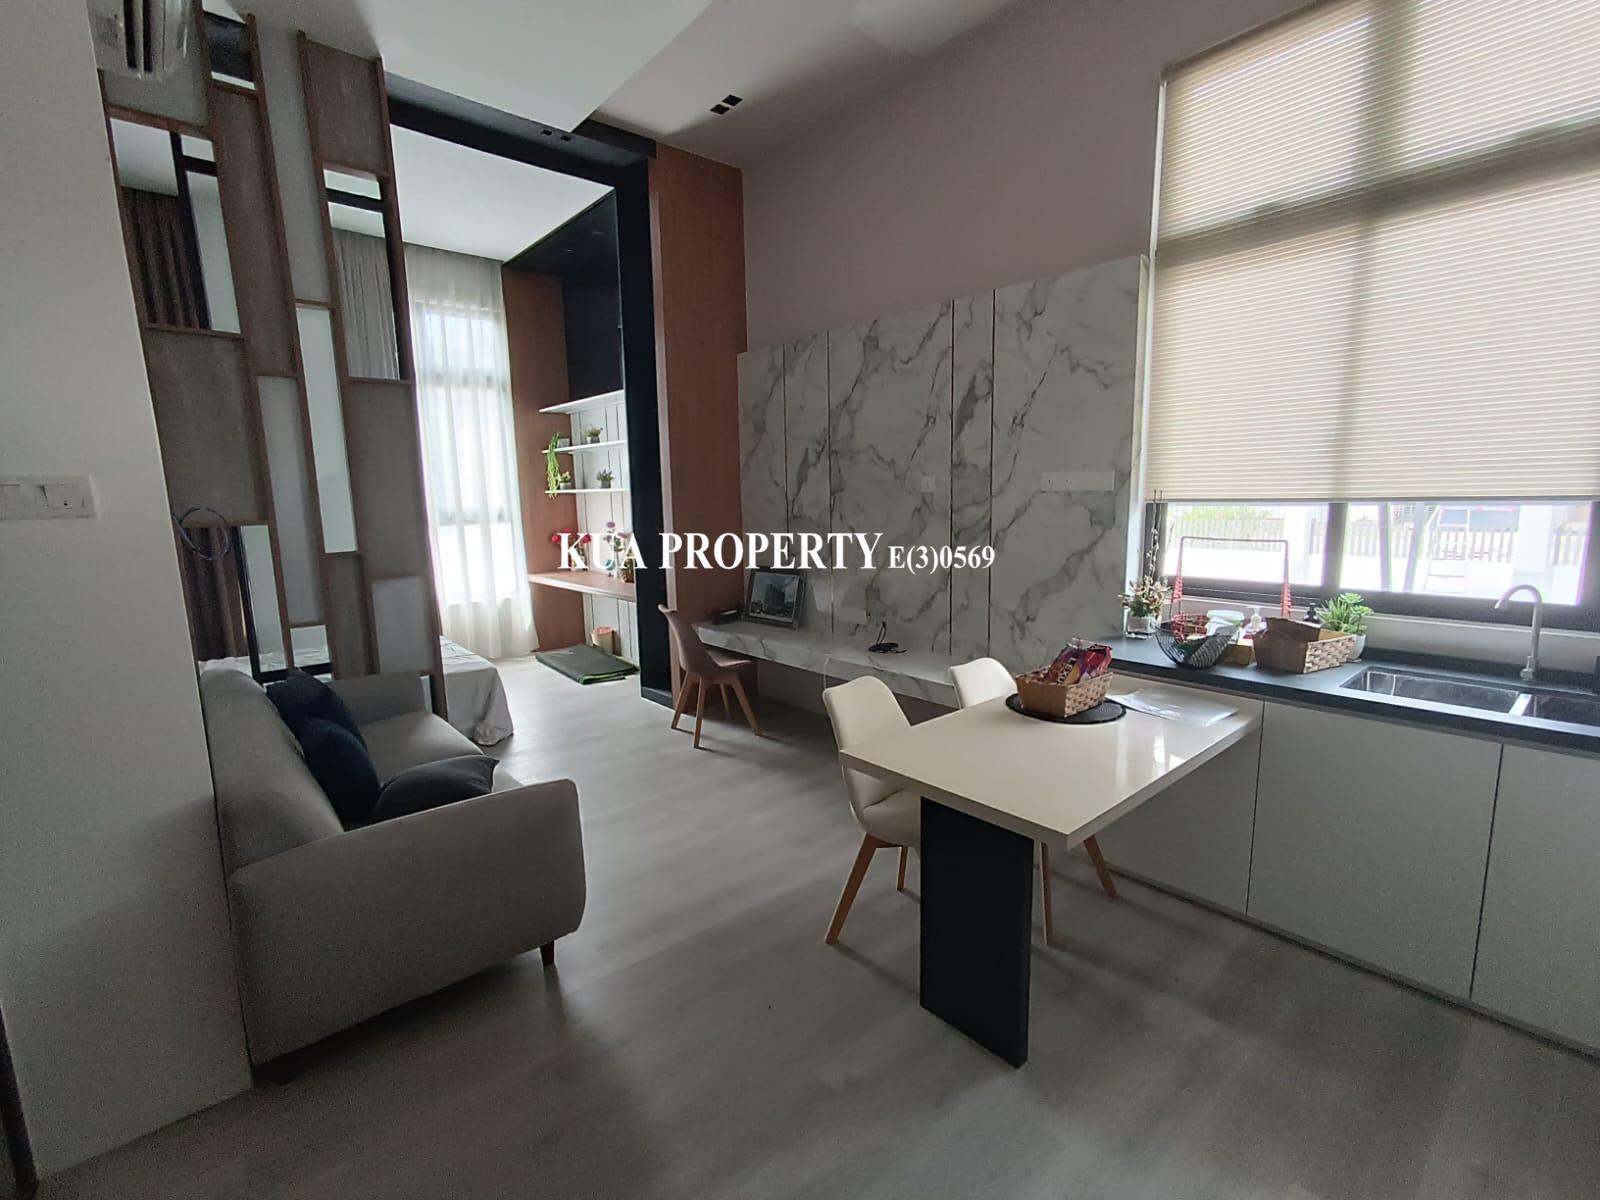 Tabuan Residence Apartment for Rent! Next to Chonglin Park